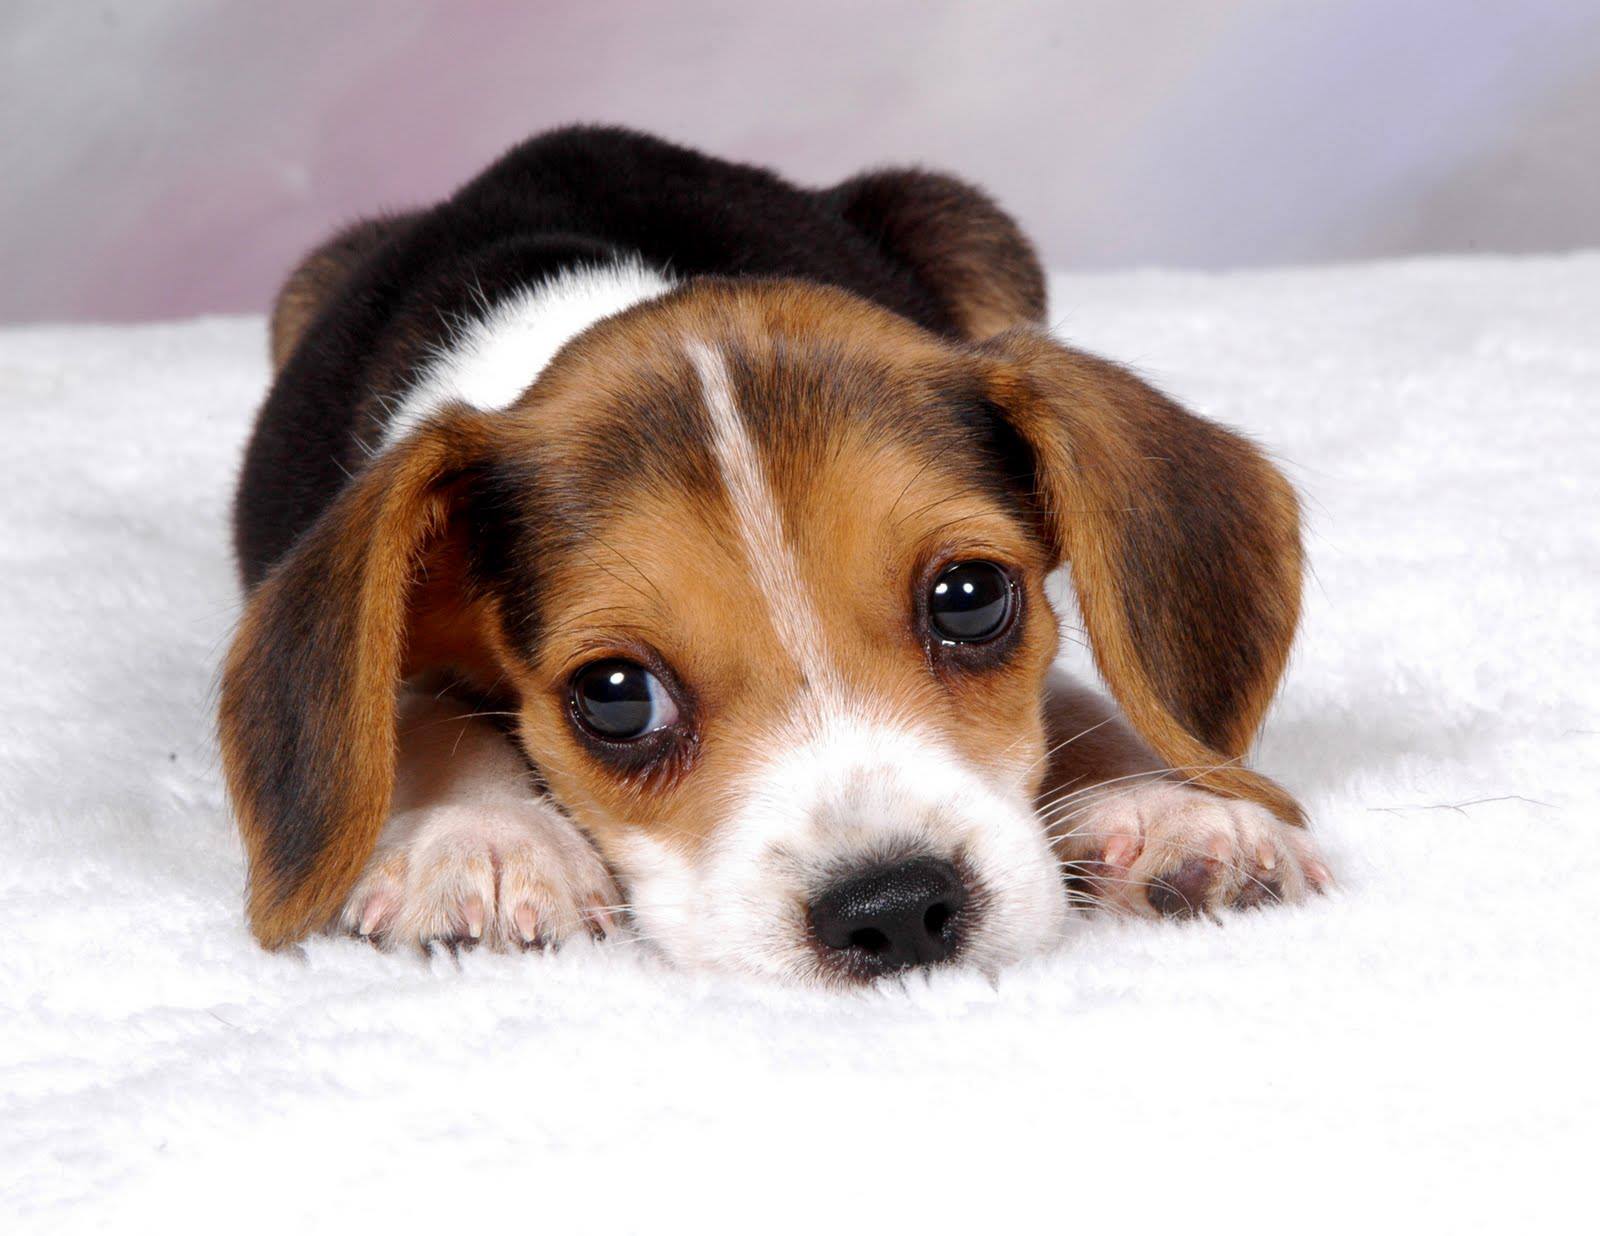 How much does a Beagle Puppy cost? - Annie Many